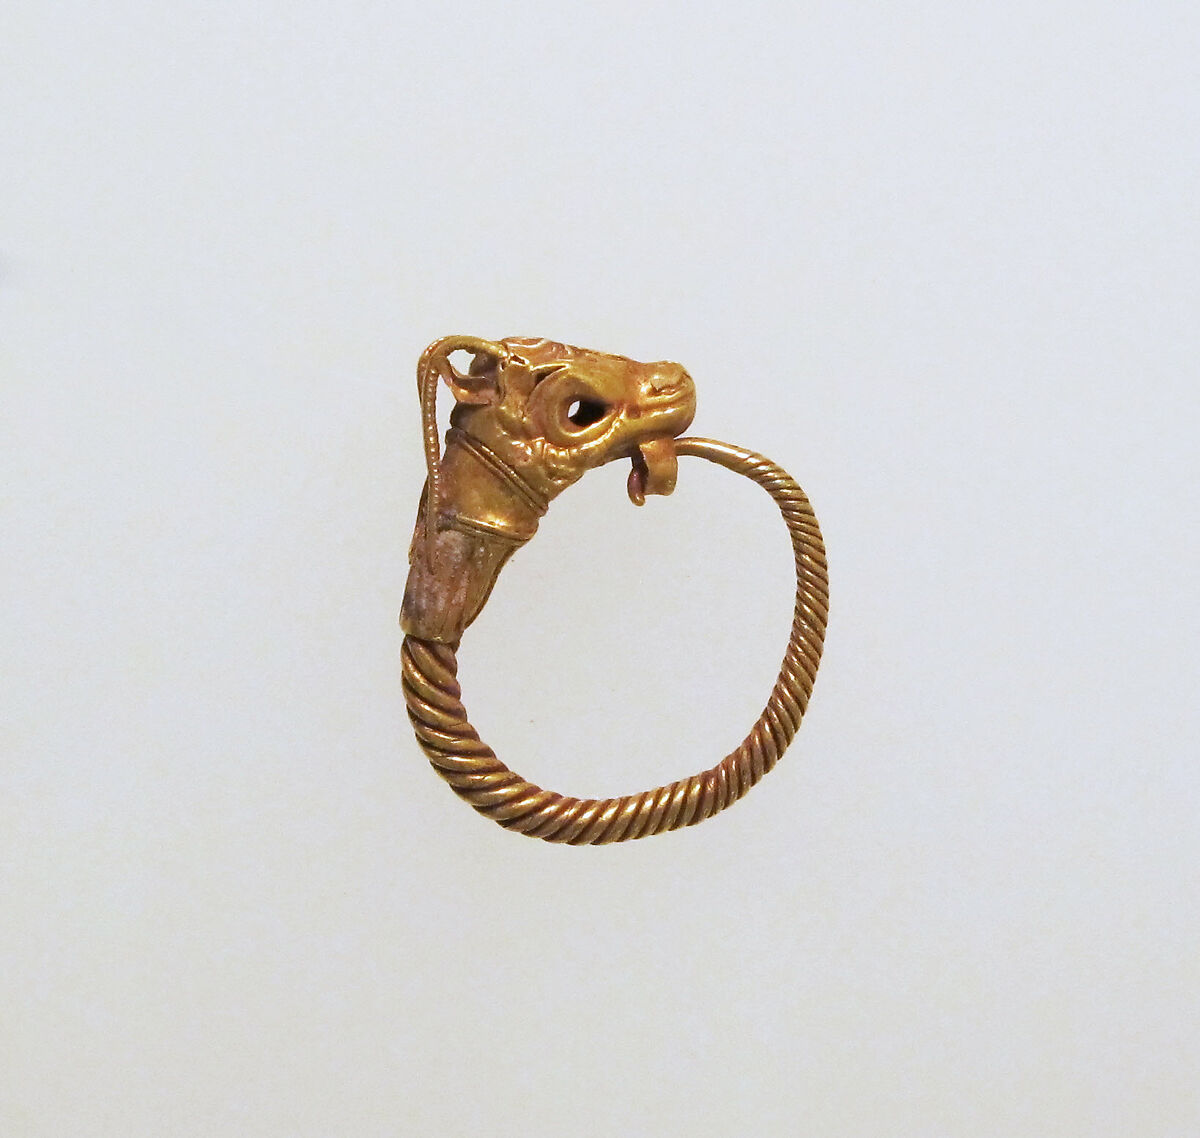 Gold earring with head of a goat, Gold, Greek 